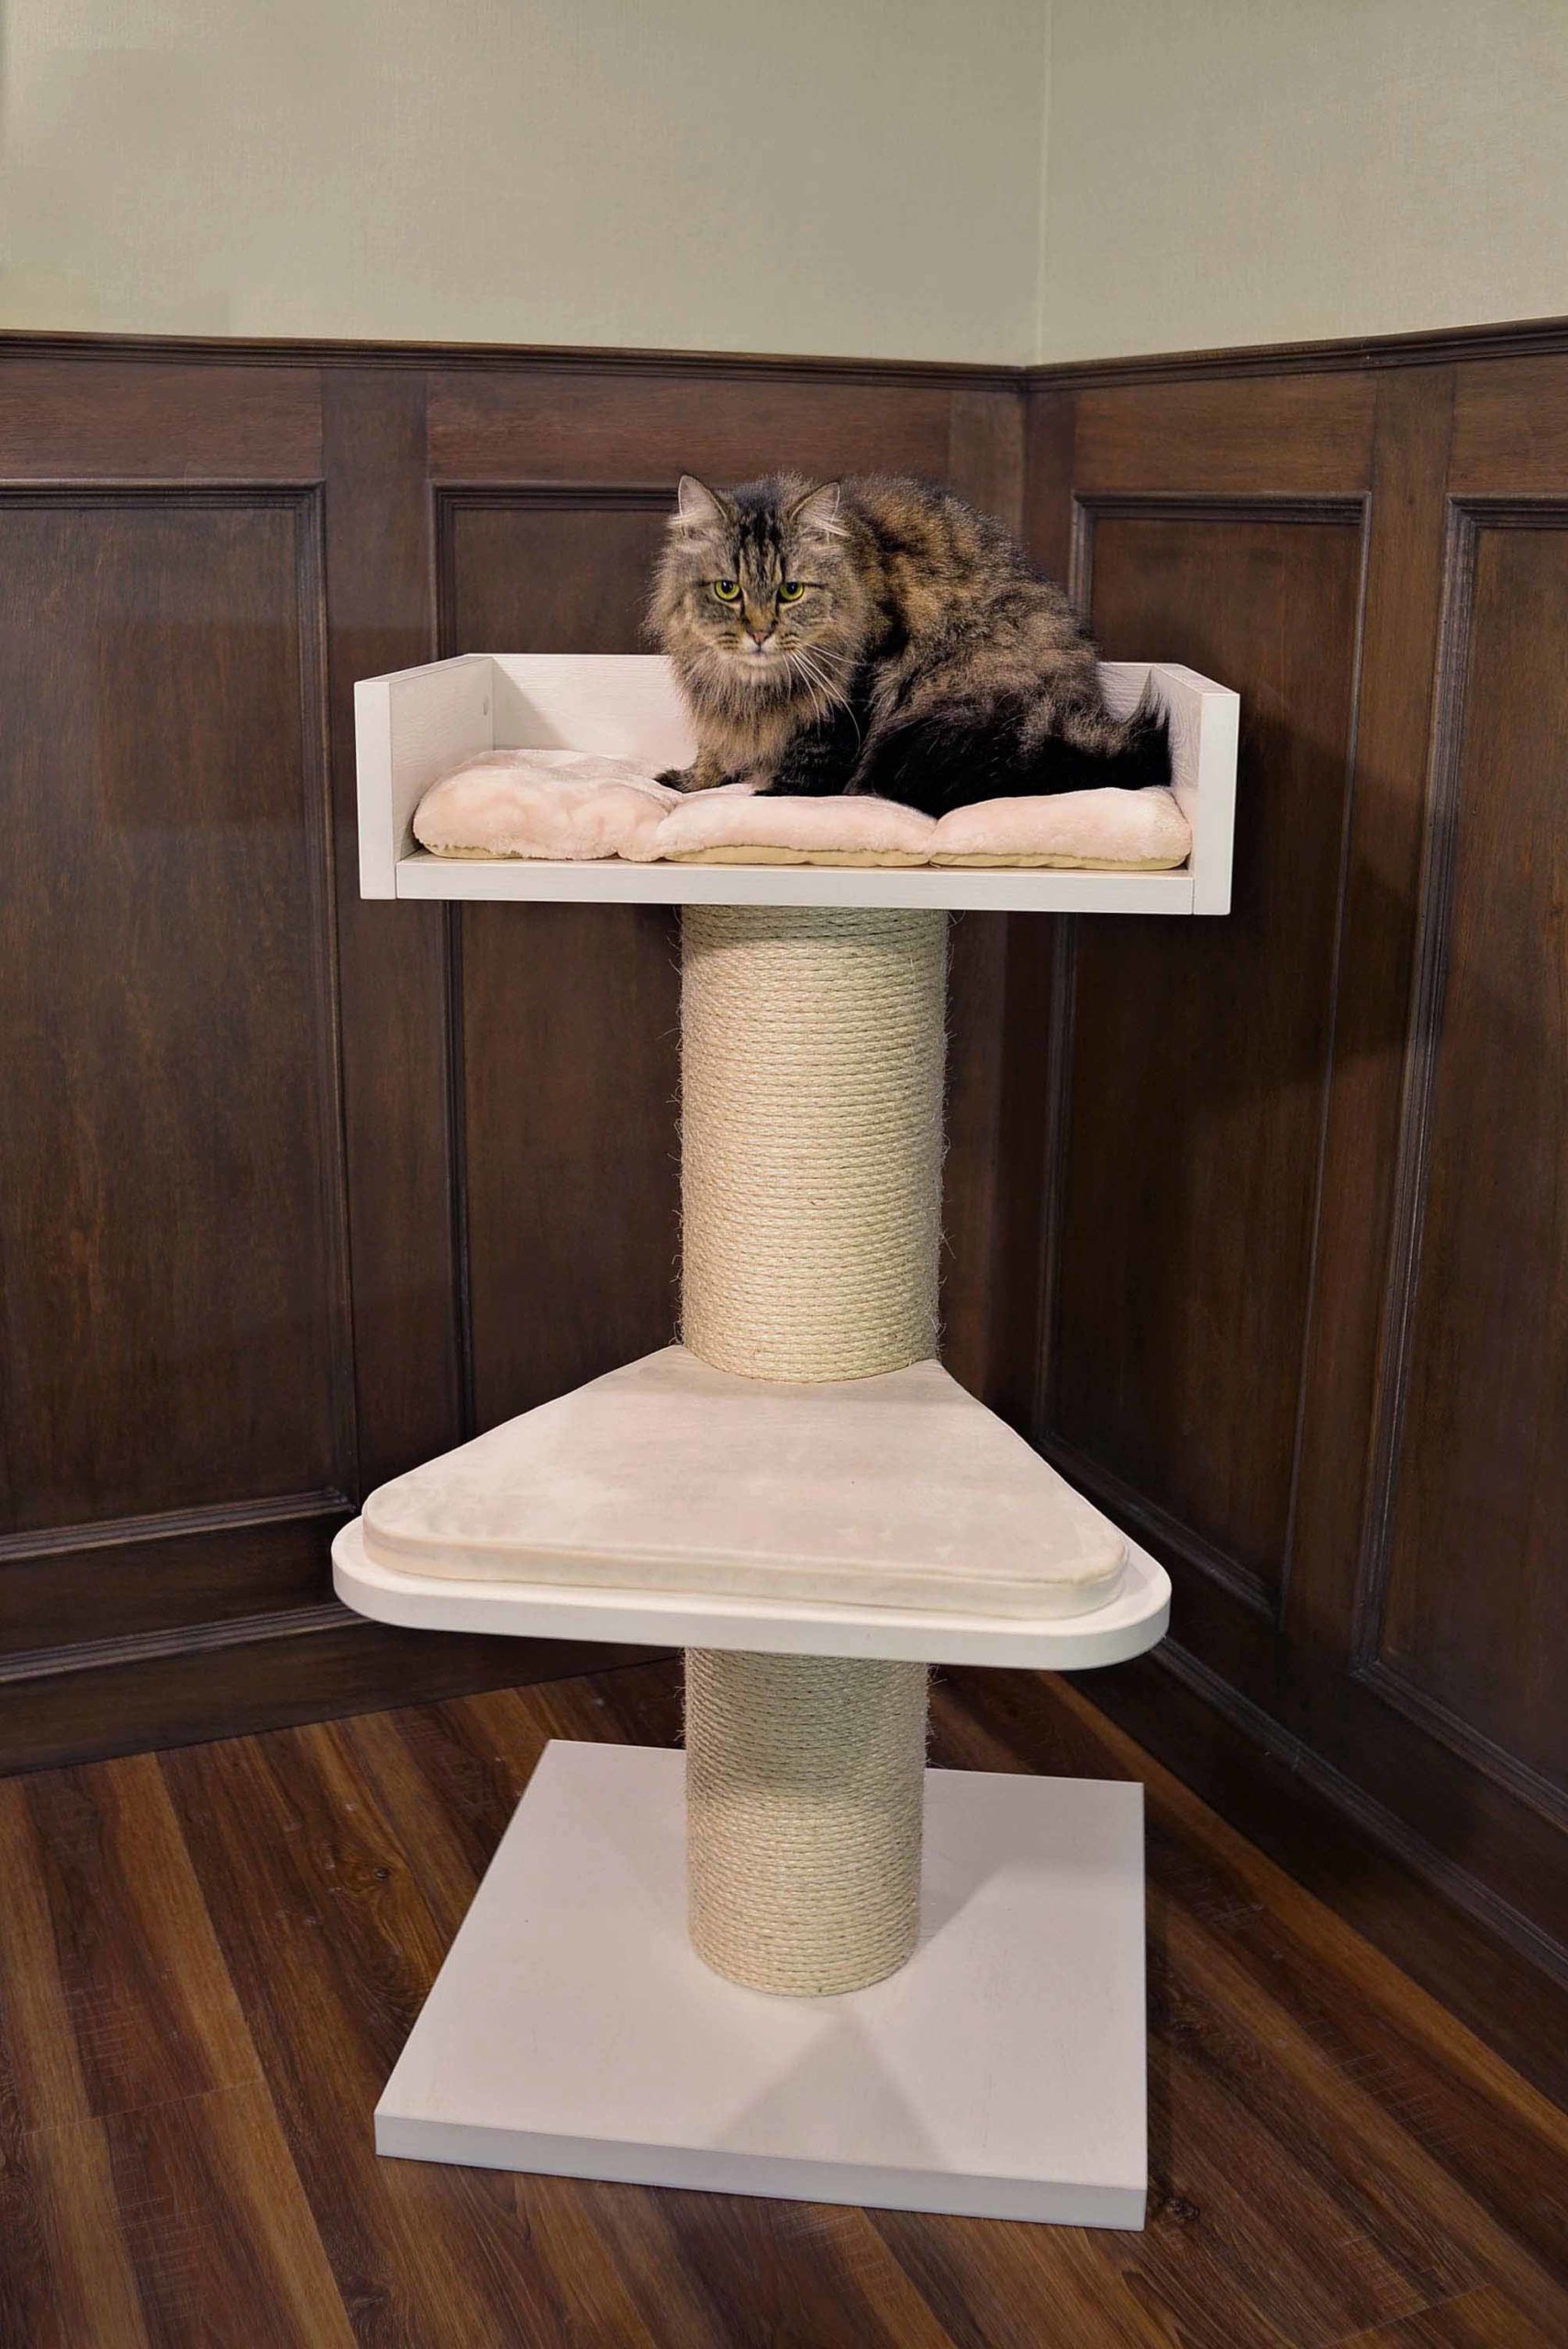 Maine Coon Lounger De Luxe (Creme) LOWEST PRICES GUARANTEED FREE DELIVERY